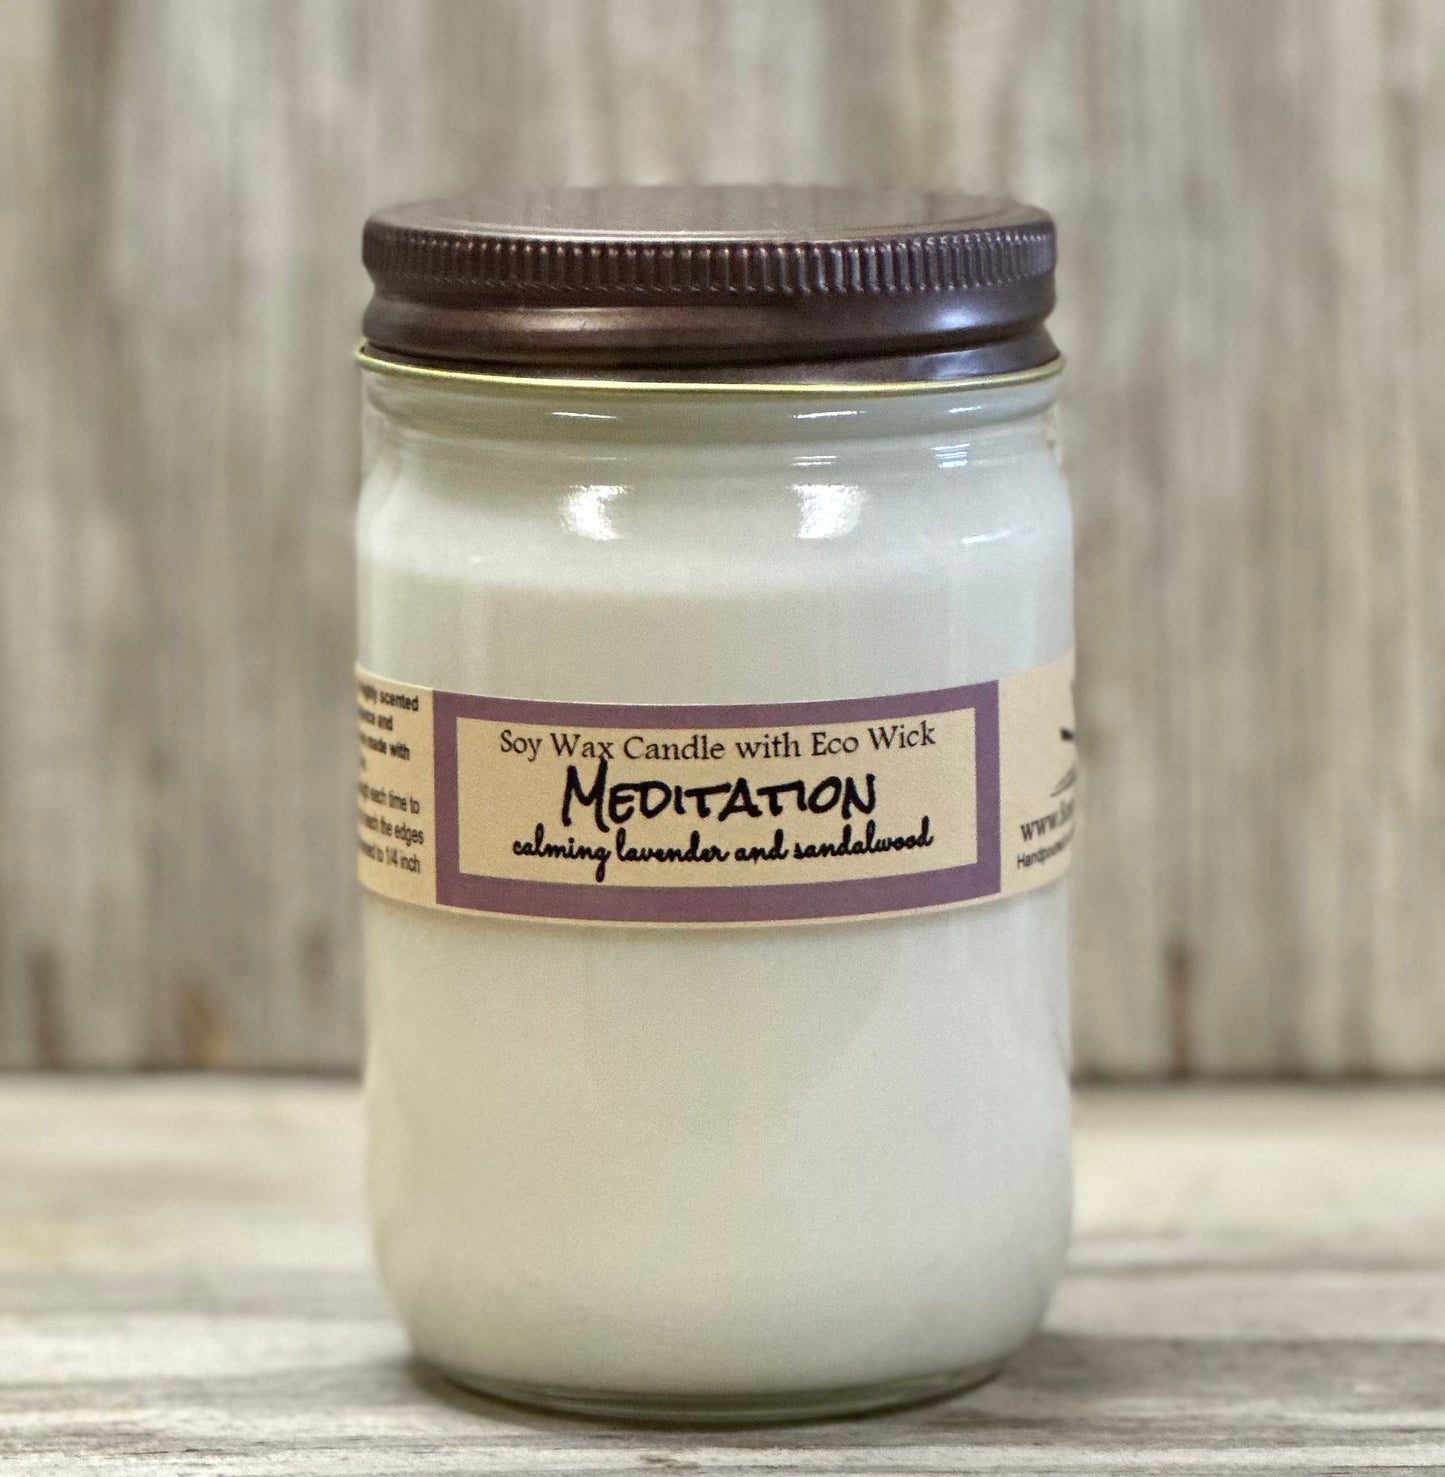 Meditation Scented Soy Wax Candle